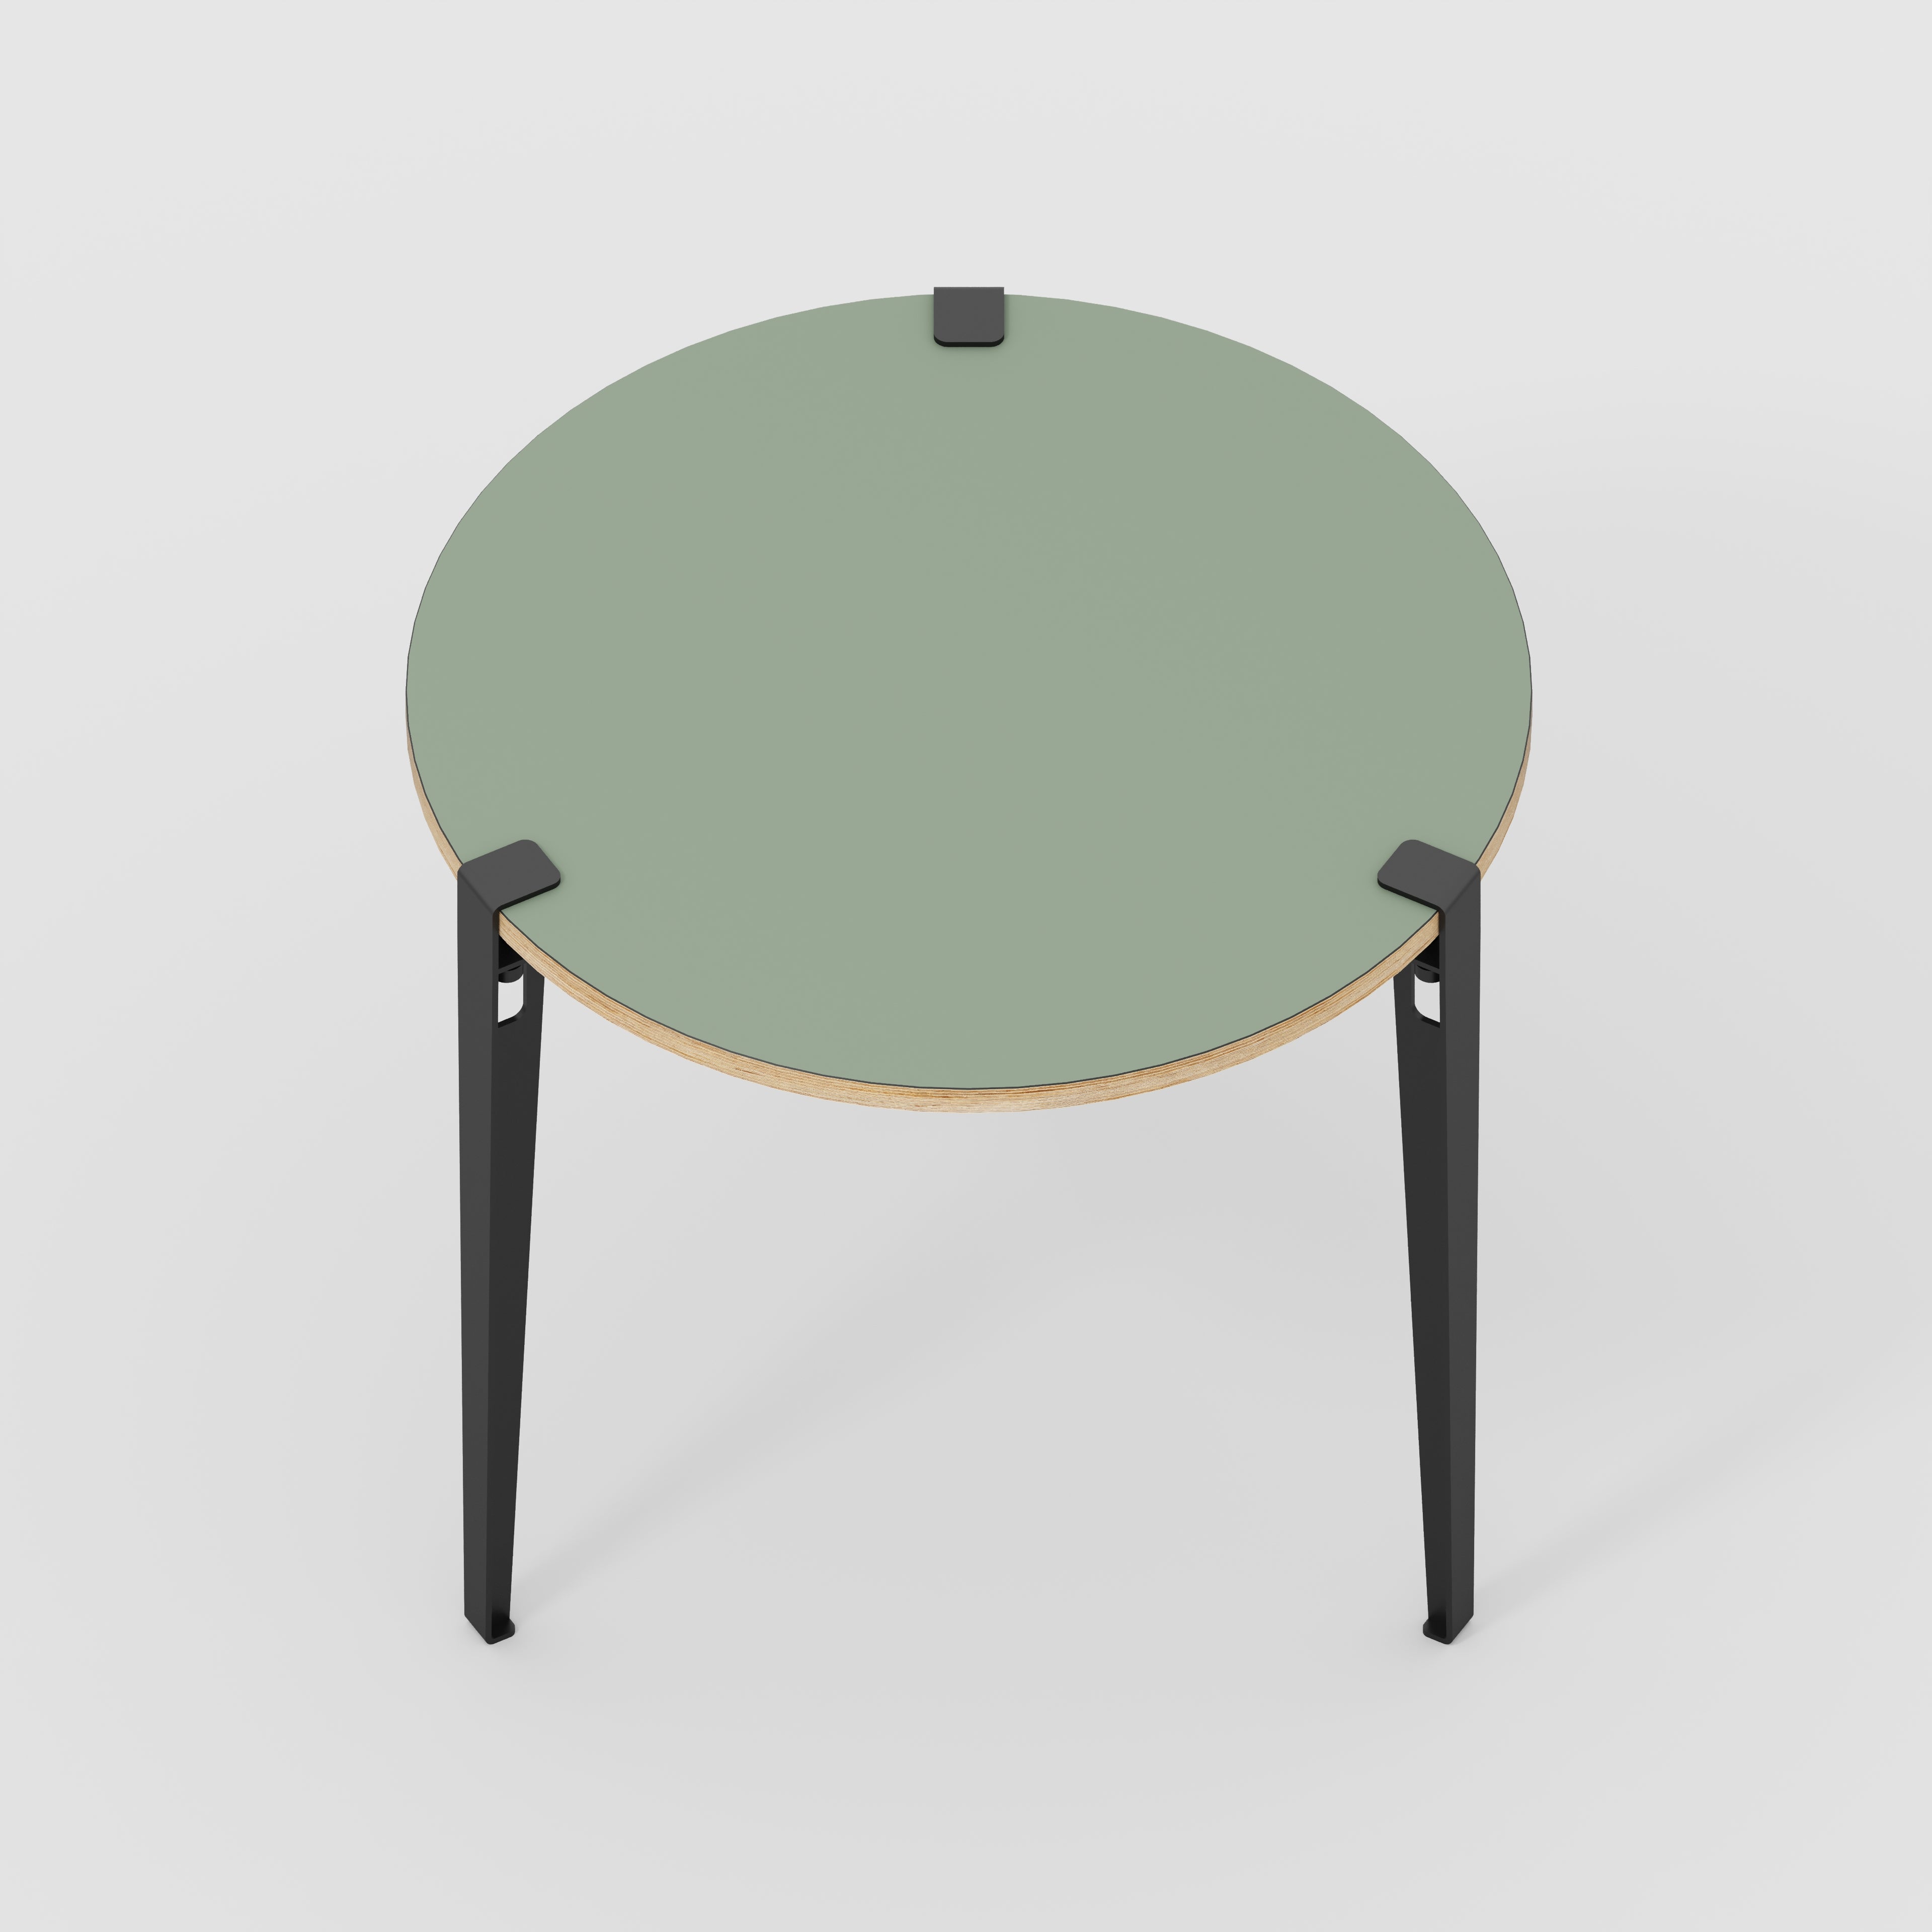 Round Table with Black Tiptoe Legs - Formica Green Slate - 800(dia) x 750(h)